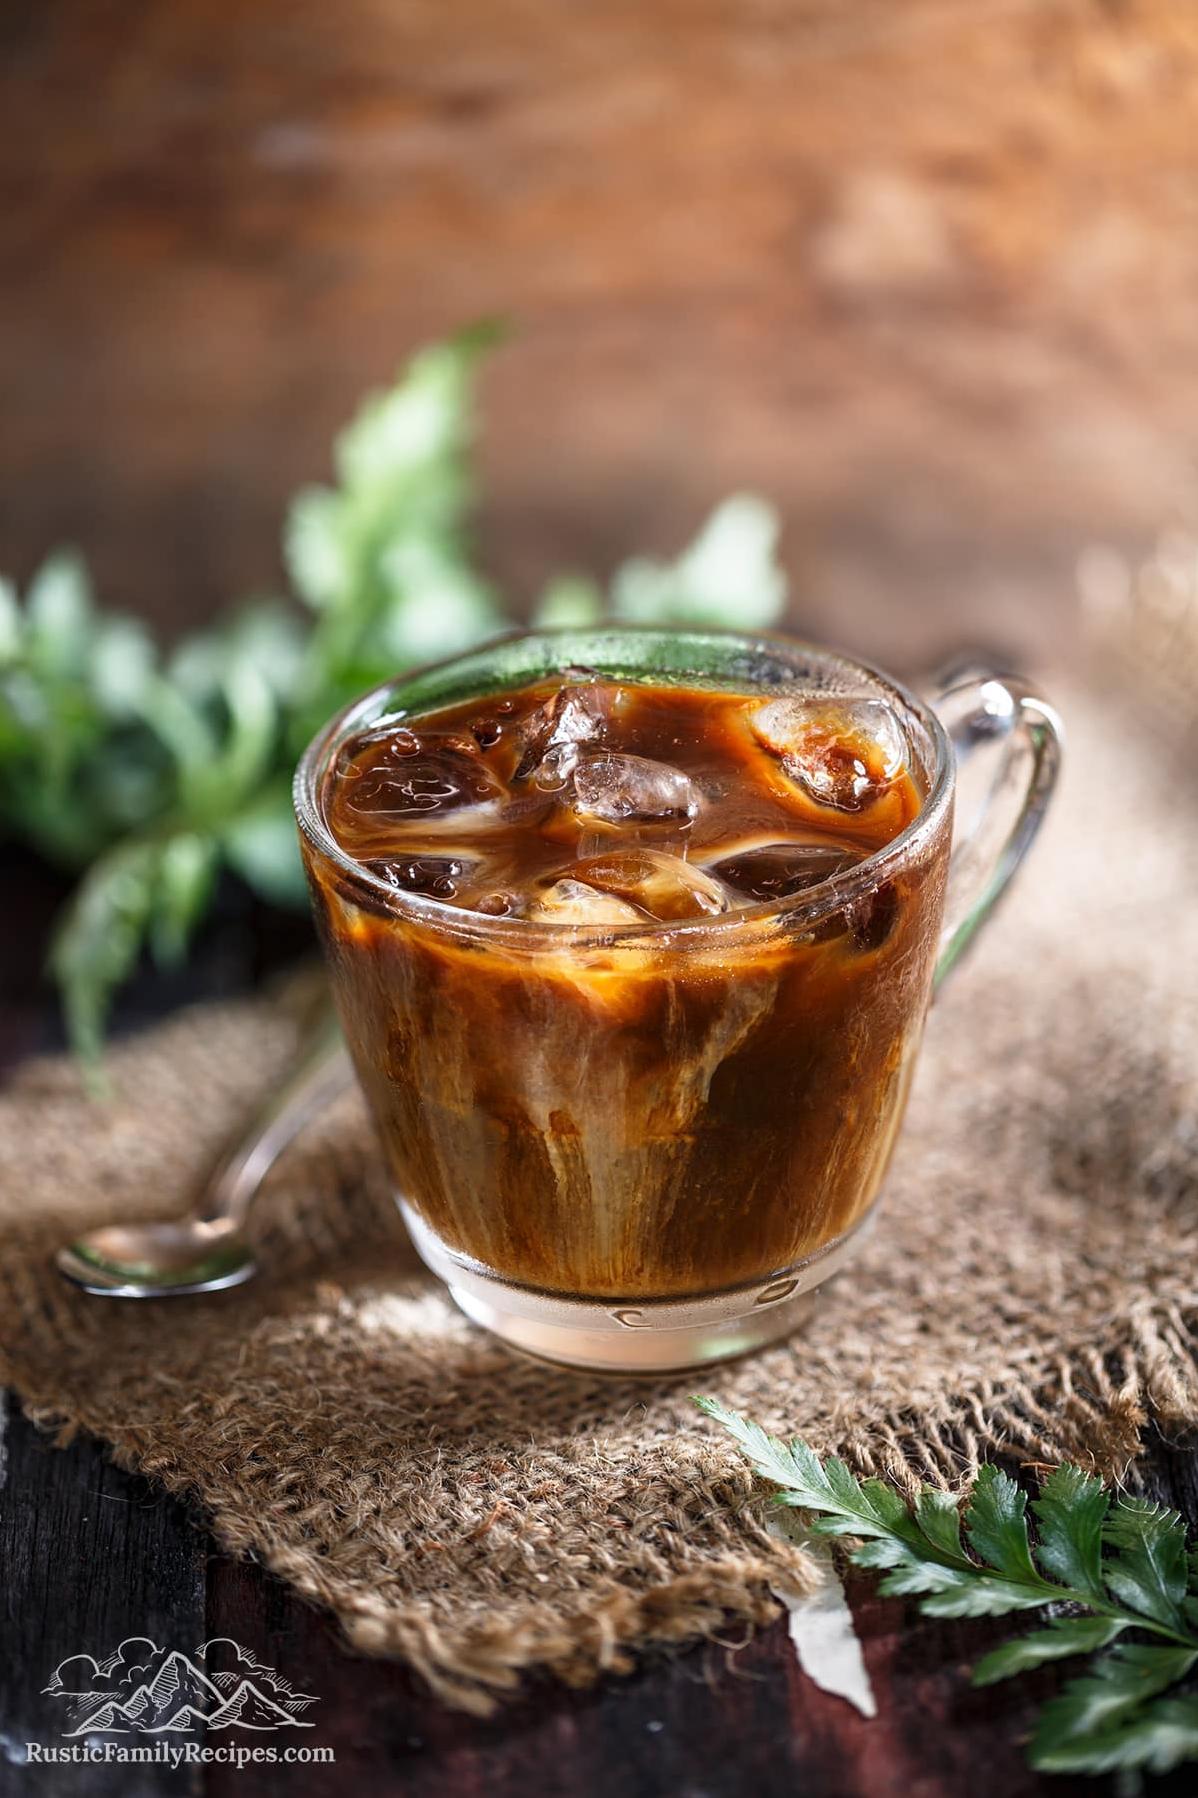 Delicious Iced Coffee with a Twist of Cardamom